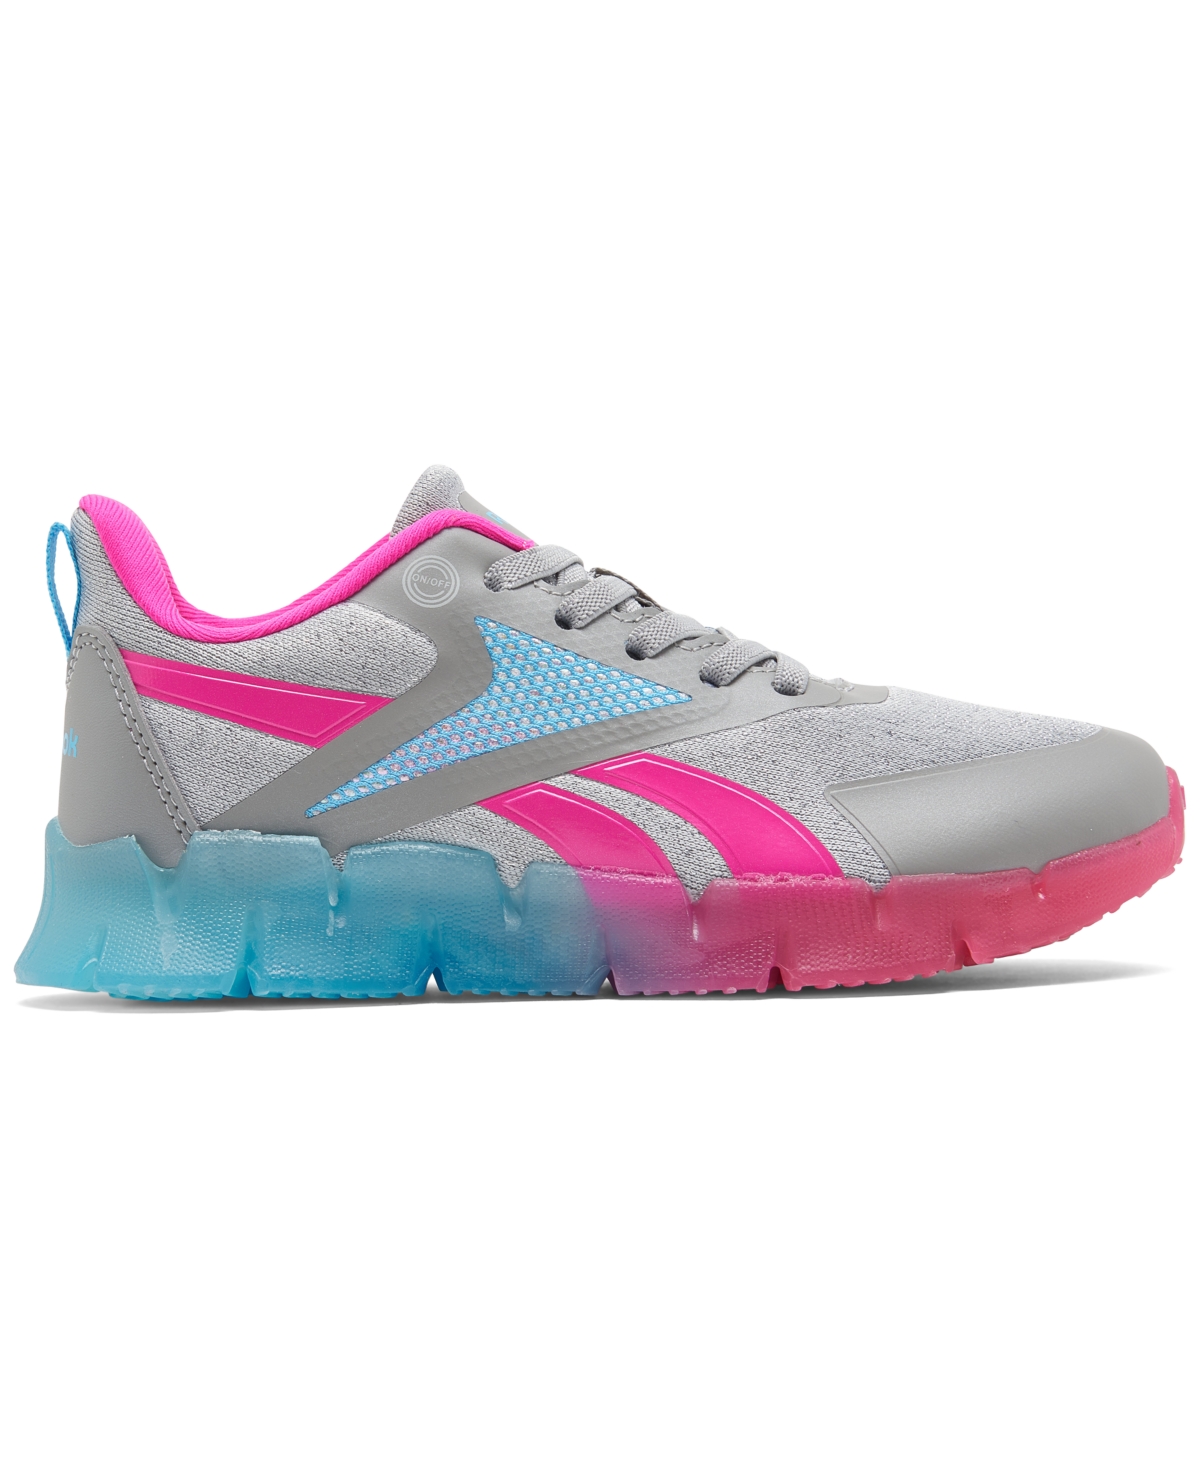 Shop Reebok Toddler Girls Zig N Flash Light-up Casual Sneakers From Finish Line In Gray,pink,blue